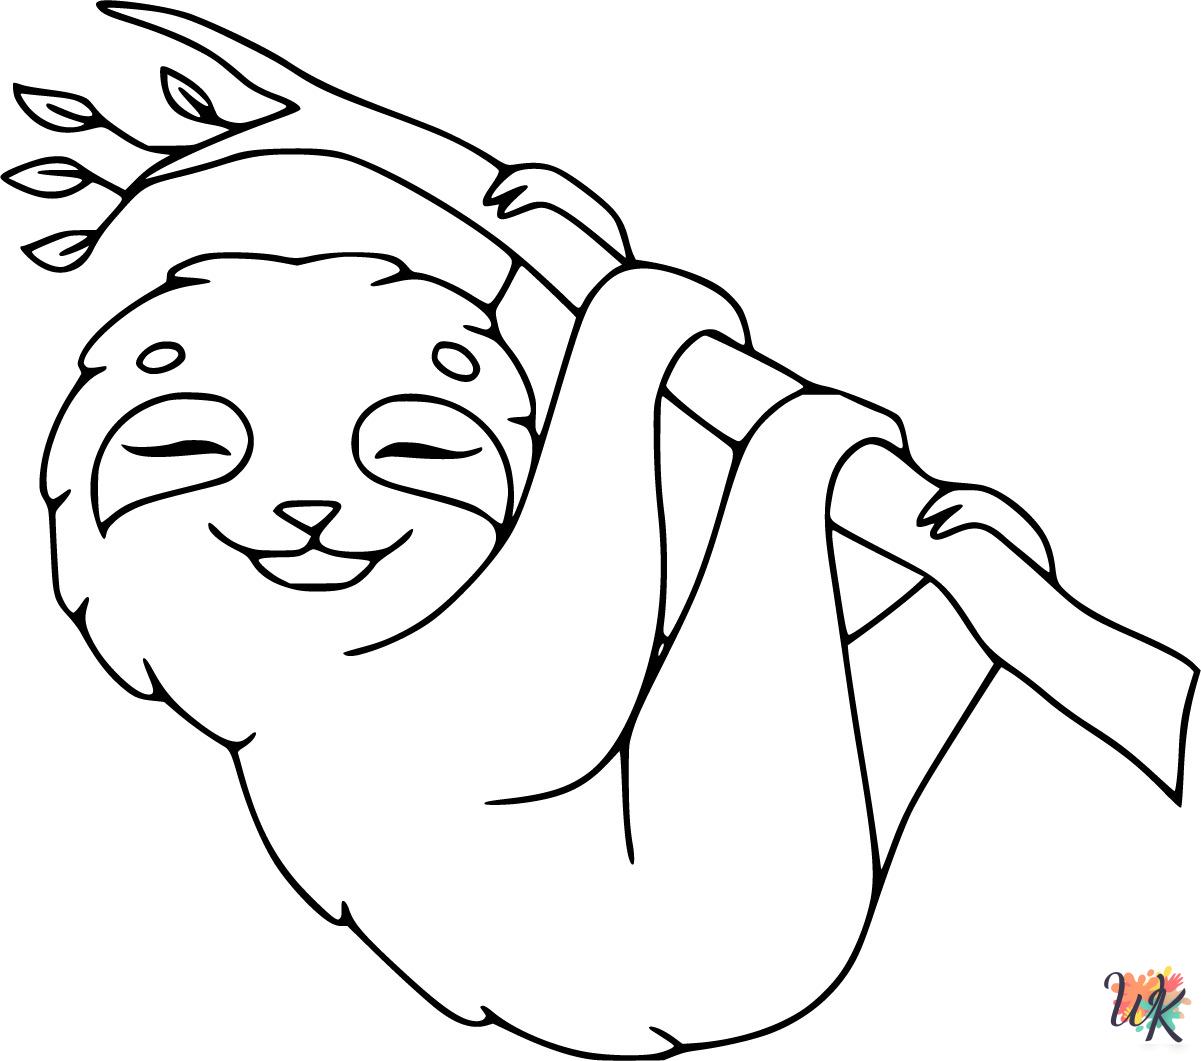 Sloth coloring pages for adults pdf